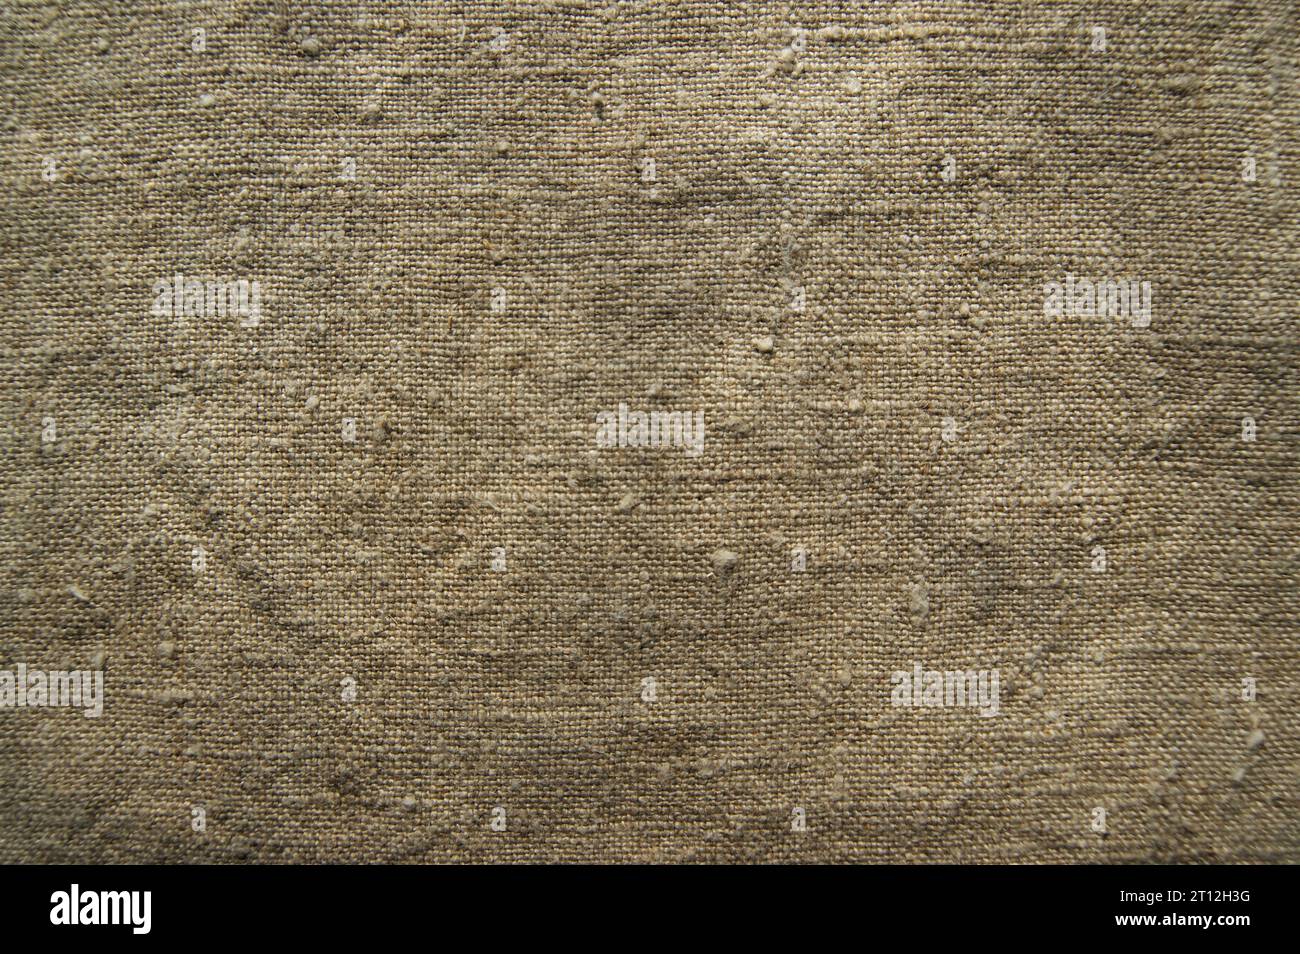 Natural linen fabric texture. Canvas background. Stock Photo